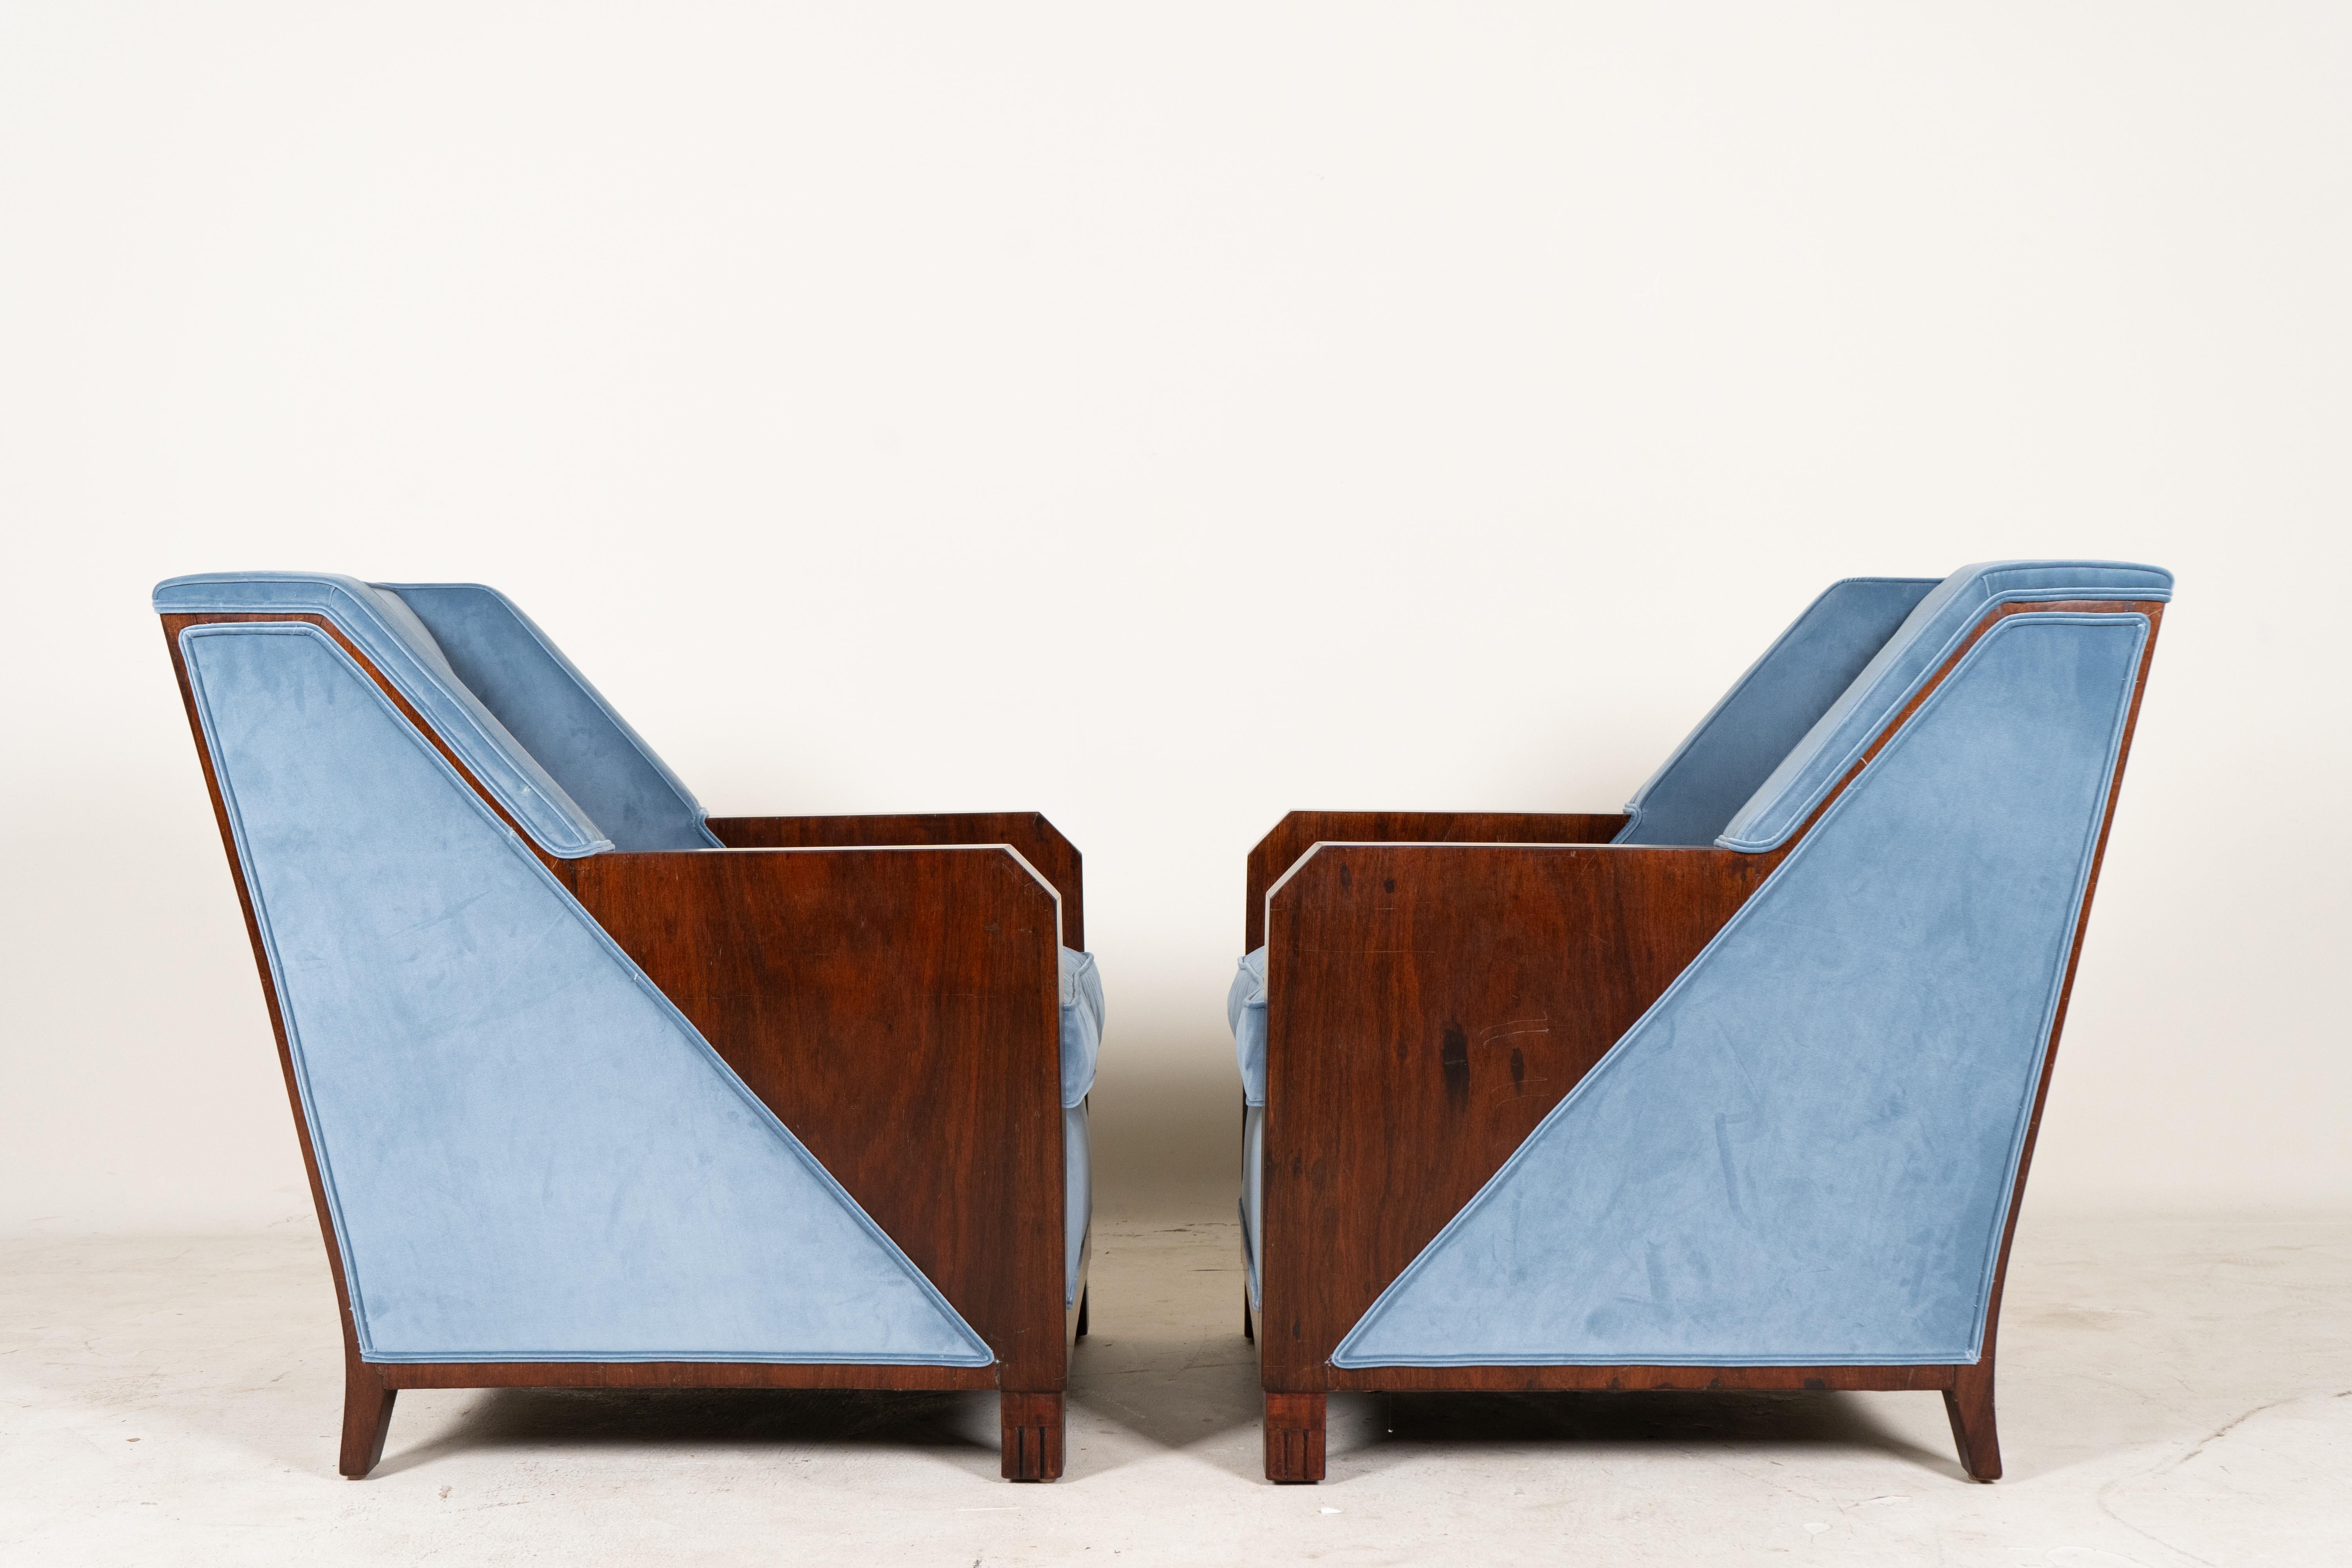 
These chairs by Andre Domin and Marcel Genevriere for Maison Dominique are exquisite examples of mid-century design, dating back to the late 1940s. Their sleek lines and sophisticated craftsmanship epitomize the era's aesthetic.

The rosewood